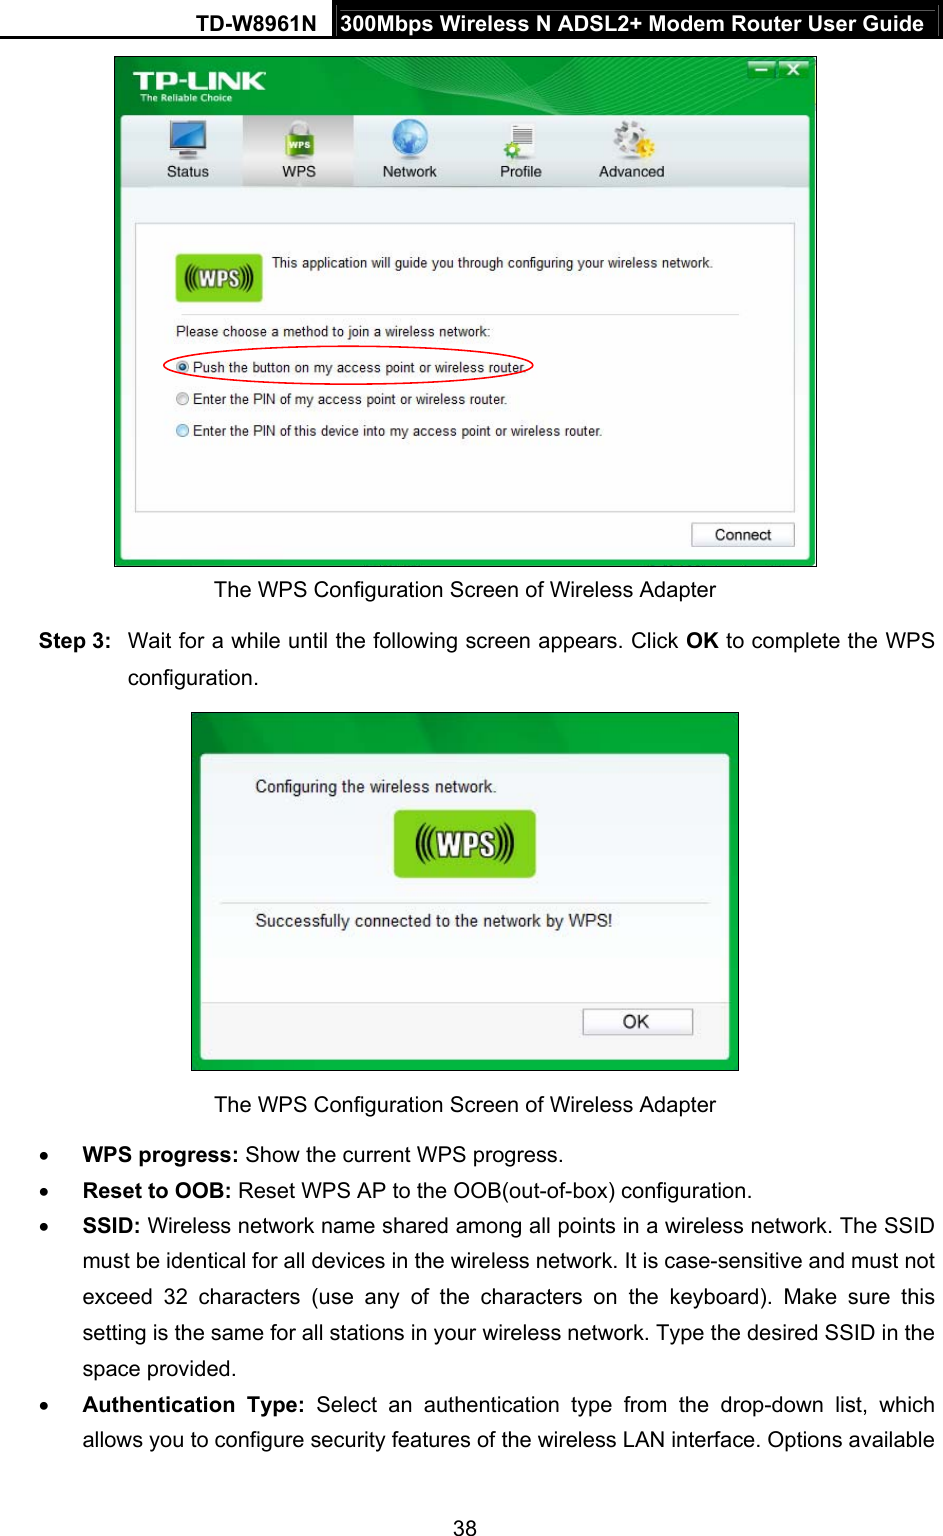 TD-W8961N  300Mbps Wireless N ADSL2+ Modem Router User Guide 38   The WPS Configuration Screen of Wireless Adapter Step 3:  Wait for a while until the following screen appears. Click OK to complete the WPS configuration.  The WPS Configuration Screen of Wireless Adapter    WPS progress: Show the current WPS progress.  Reset to OOB: Reset WPS AP to the OOB(out-of-box) configuration.  SSID: Wireless network name shared among all points in a wireless network. The SSID must be identical for all devices in the wireless network. It is case-sensitive and must not exceed 32 characters (use any of the characters on the keyboard). Make sure this setting is the same for all stations in your wireless network. Type the desired SSID in the space provided.  Authentication Type: Select an authentication type from the drop-down list, which allows you to configure security features of the wireless LAN interface. Options available 